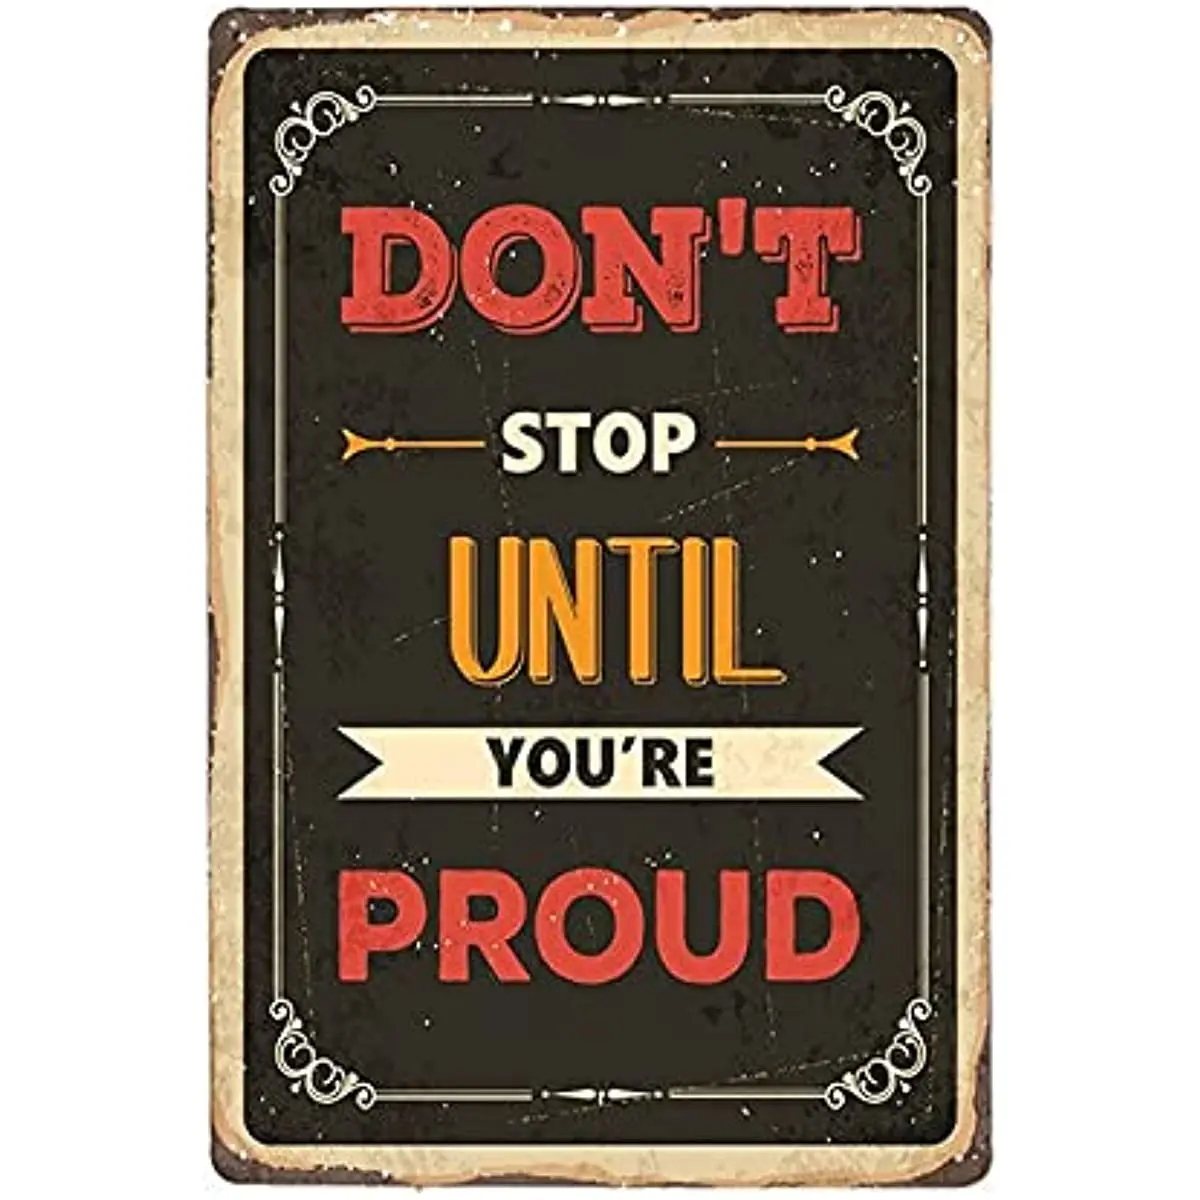 

Metal Tin Sign Vintage Decorative Saying about Life - Don't Stop Until You're Proud of Your Home Bar Cafe Farm Store Garage